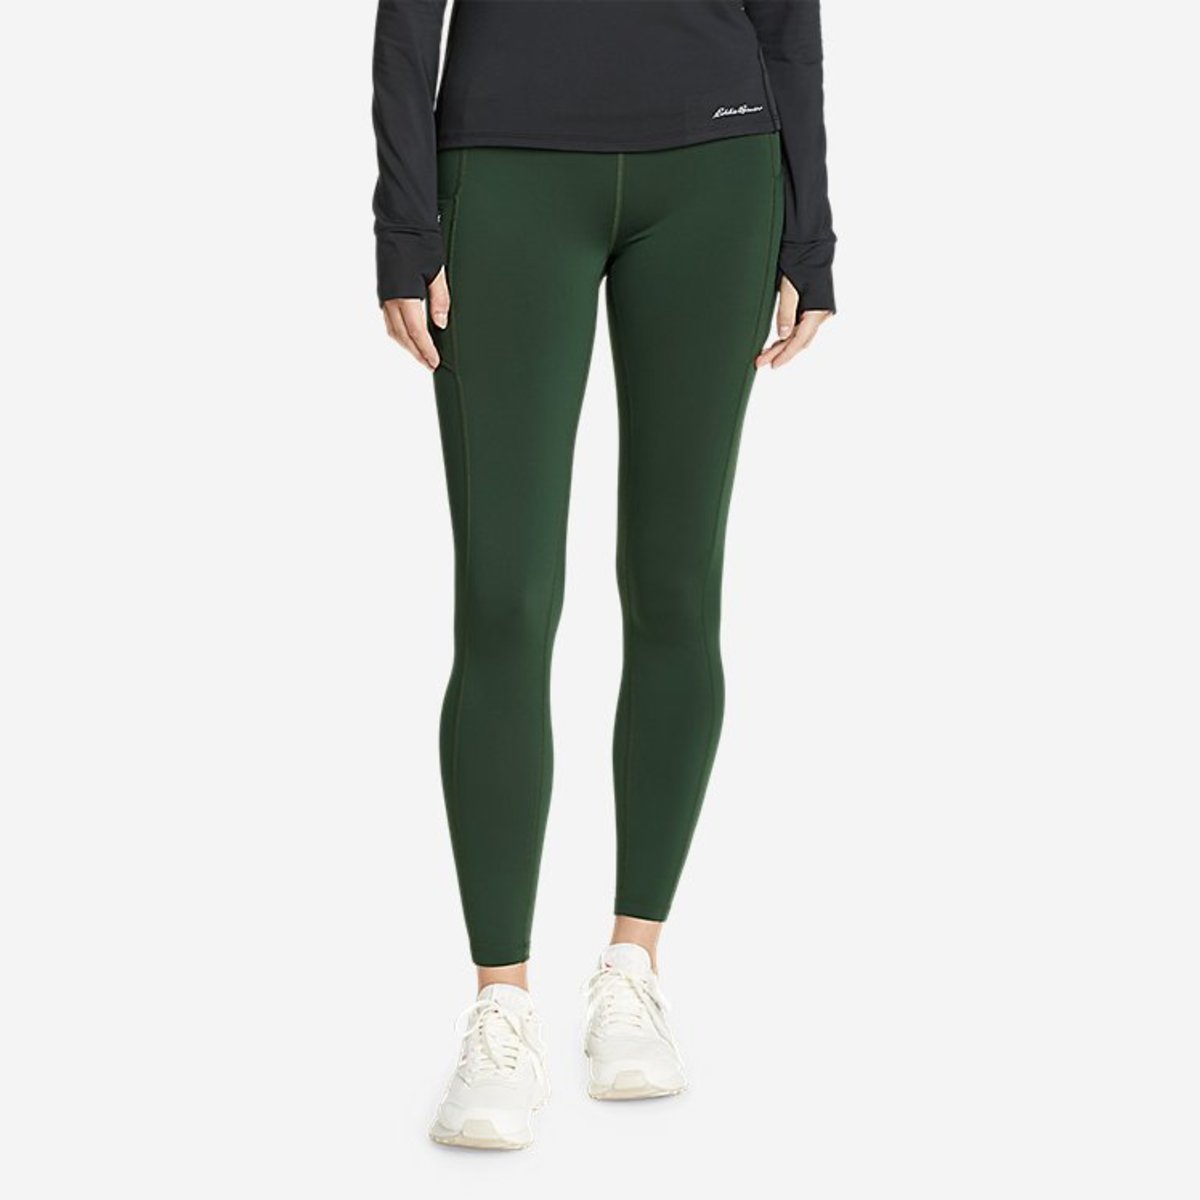 The Best Thermal Leggings for Staying Cozy All Winter